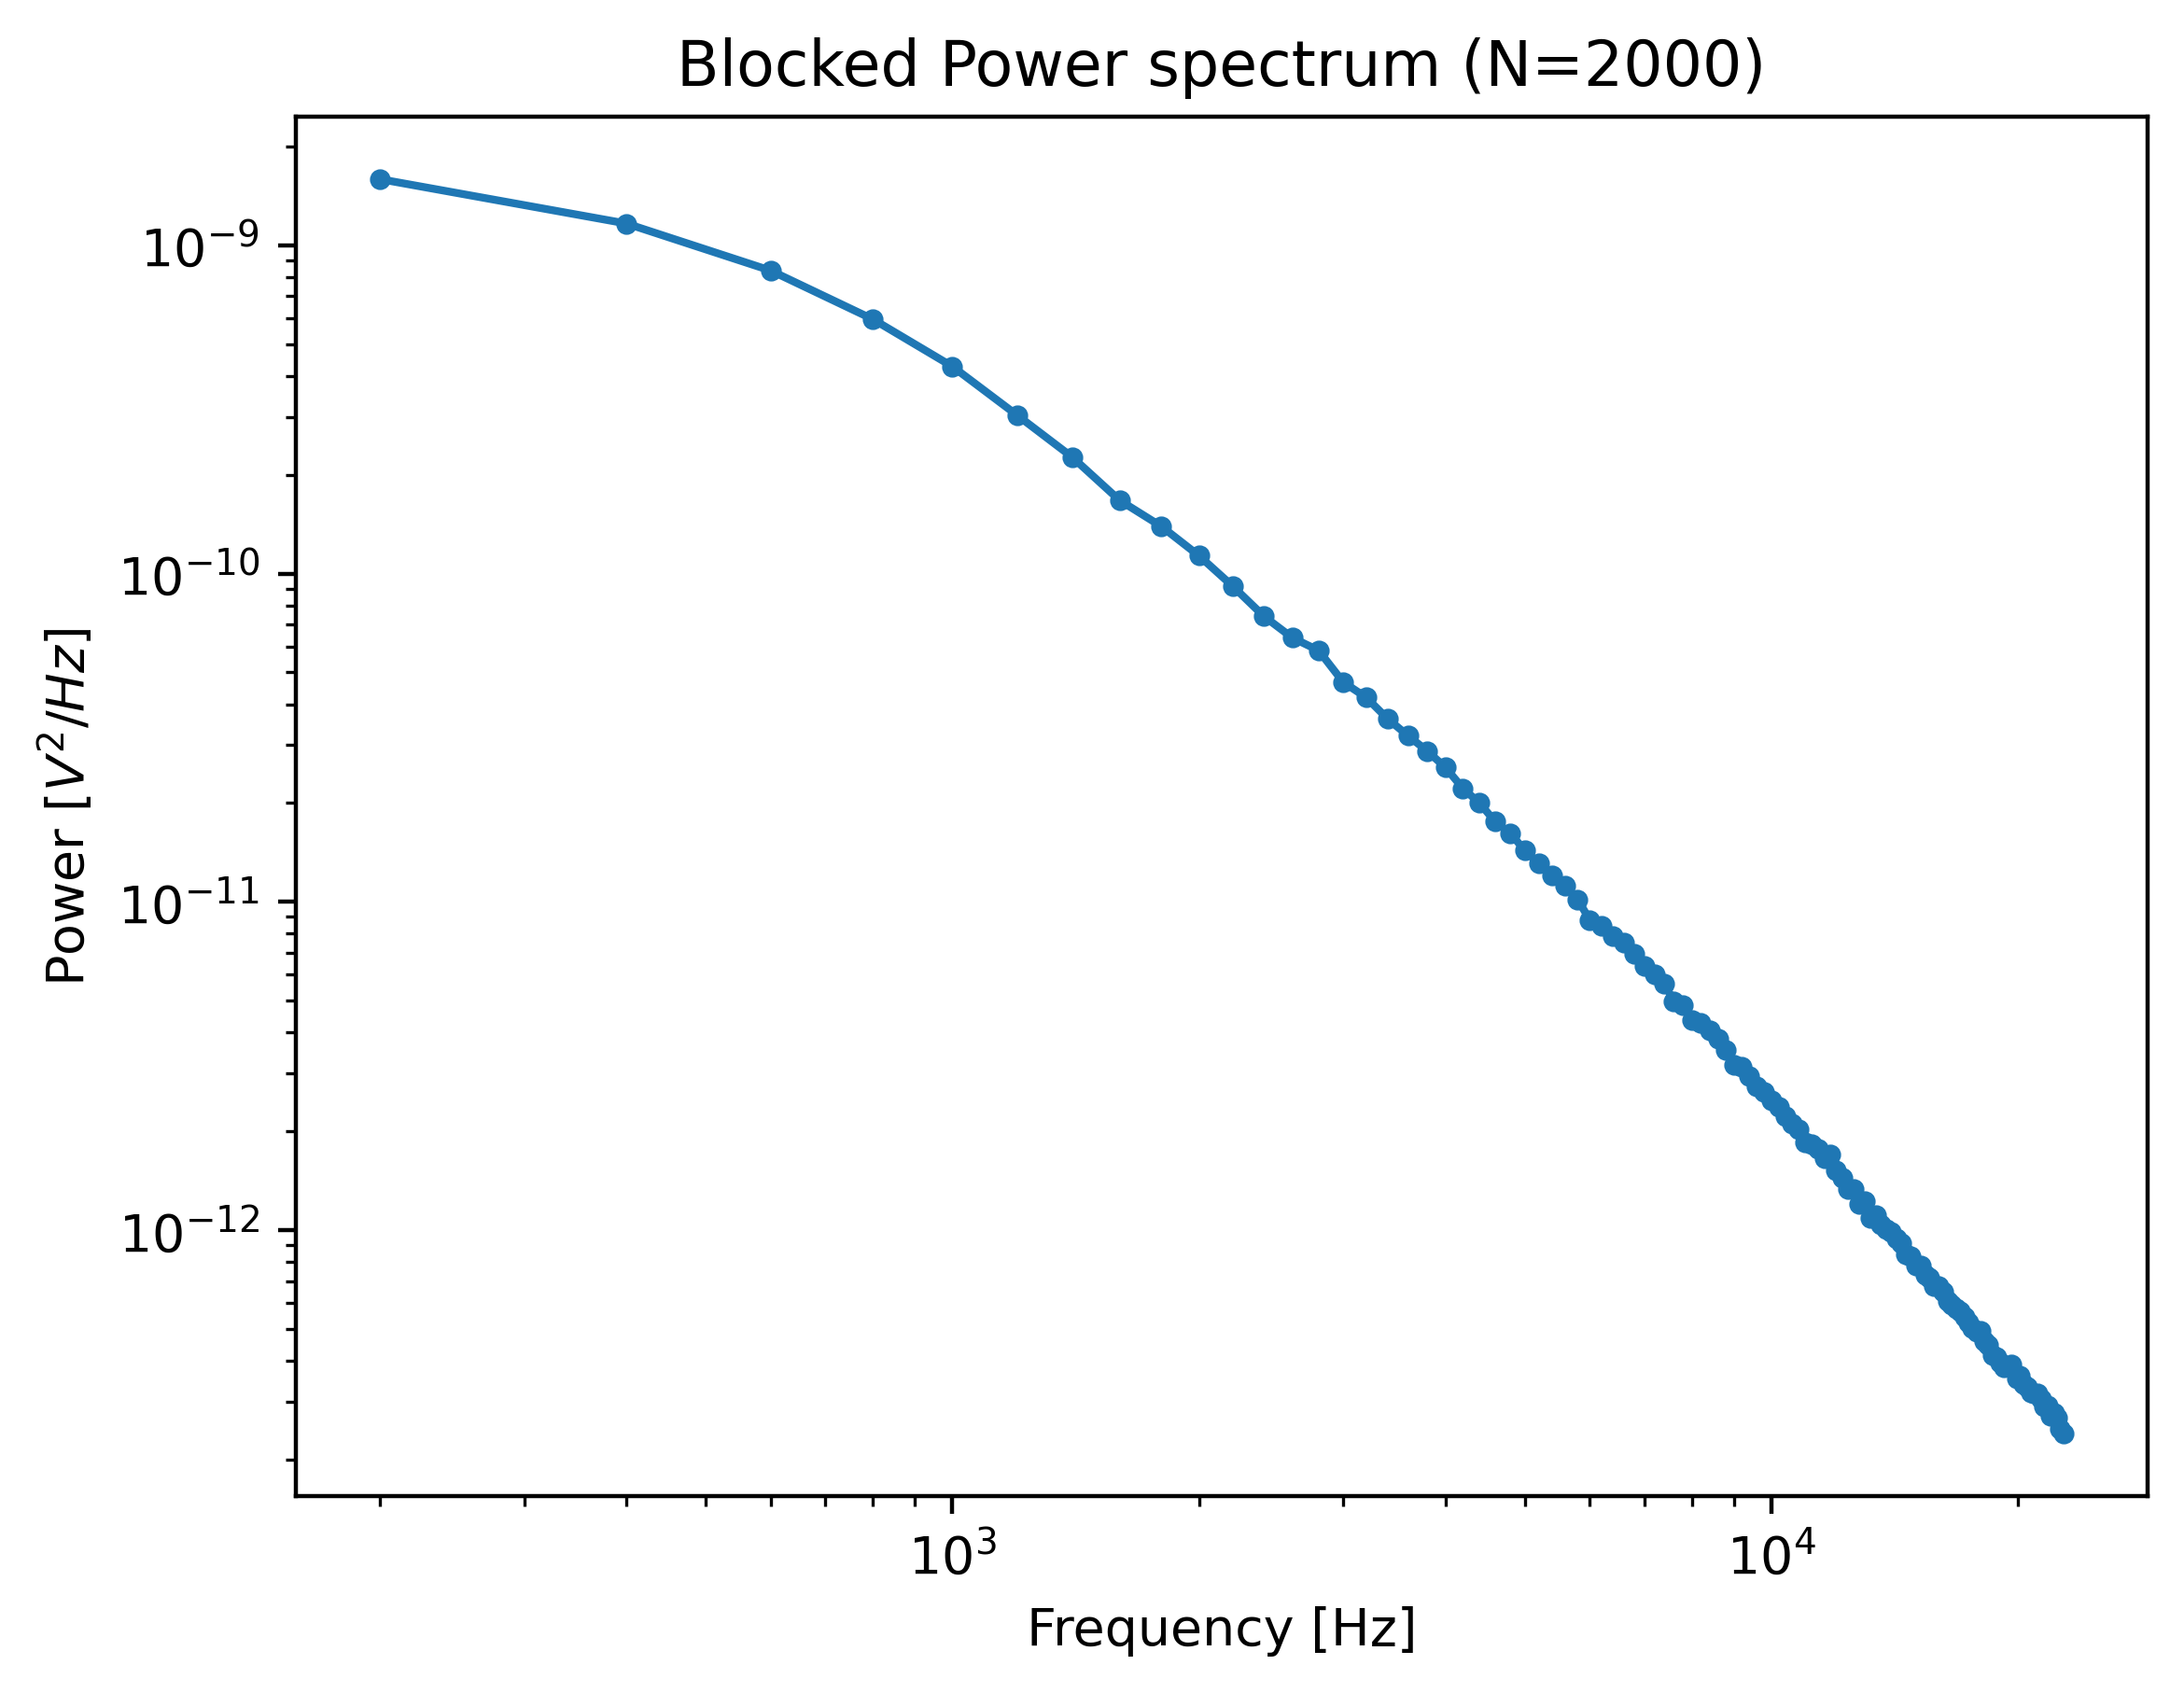 ../_images/power_spectrum_excluded_ranges.png